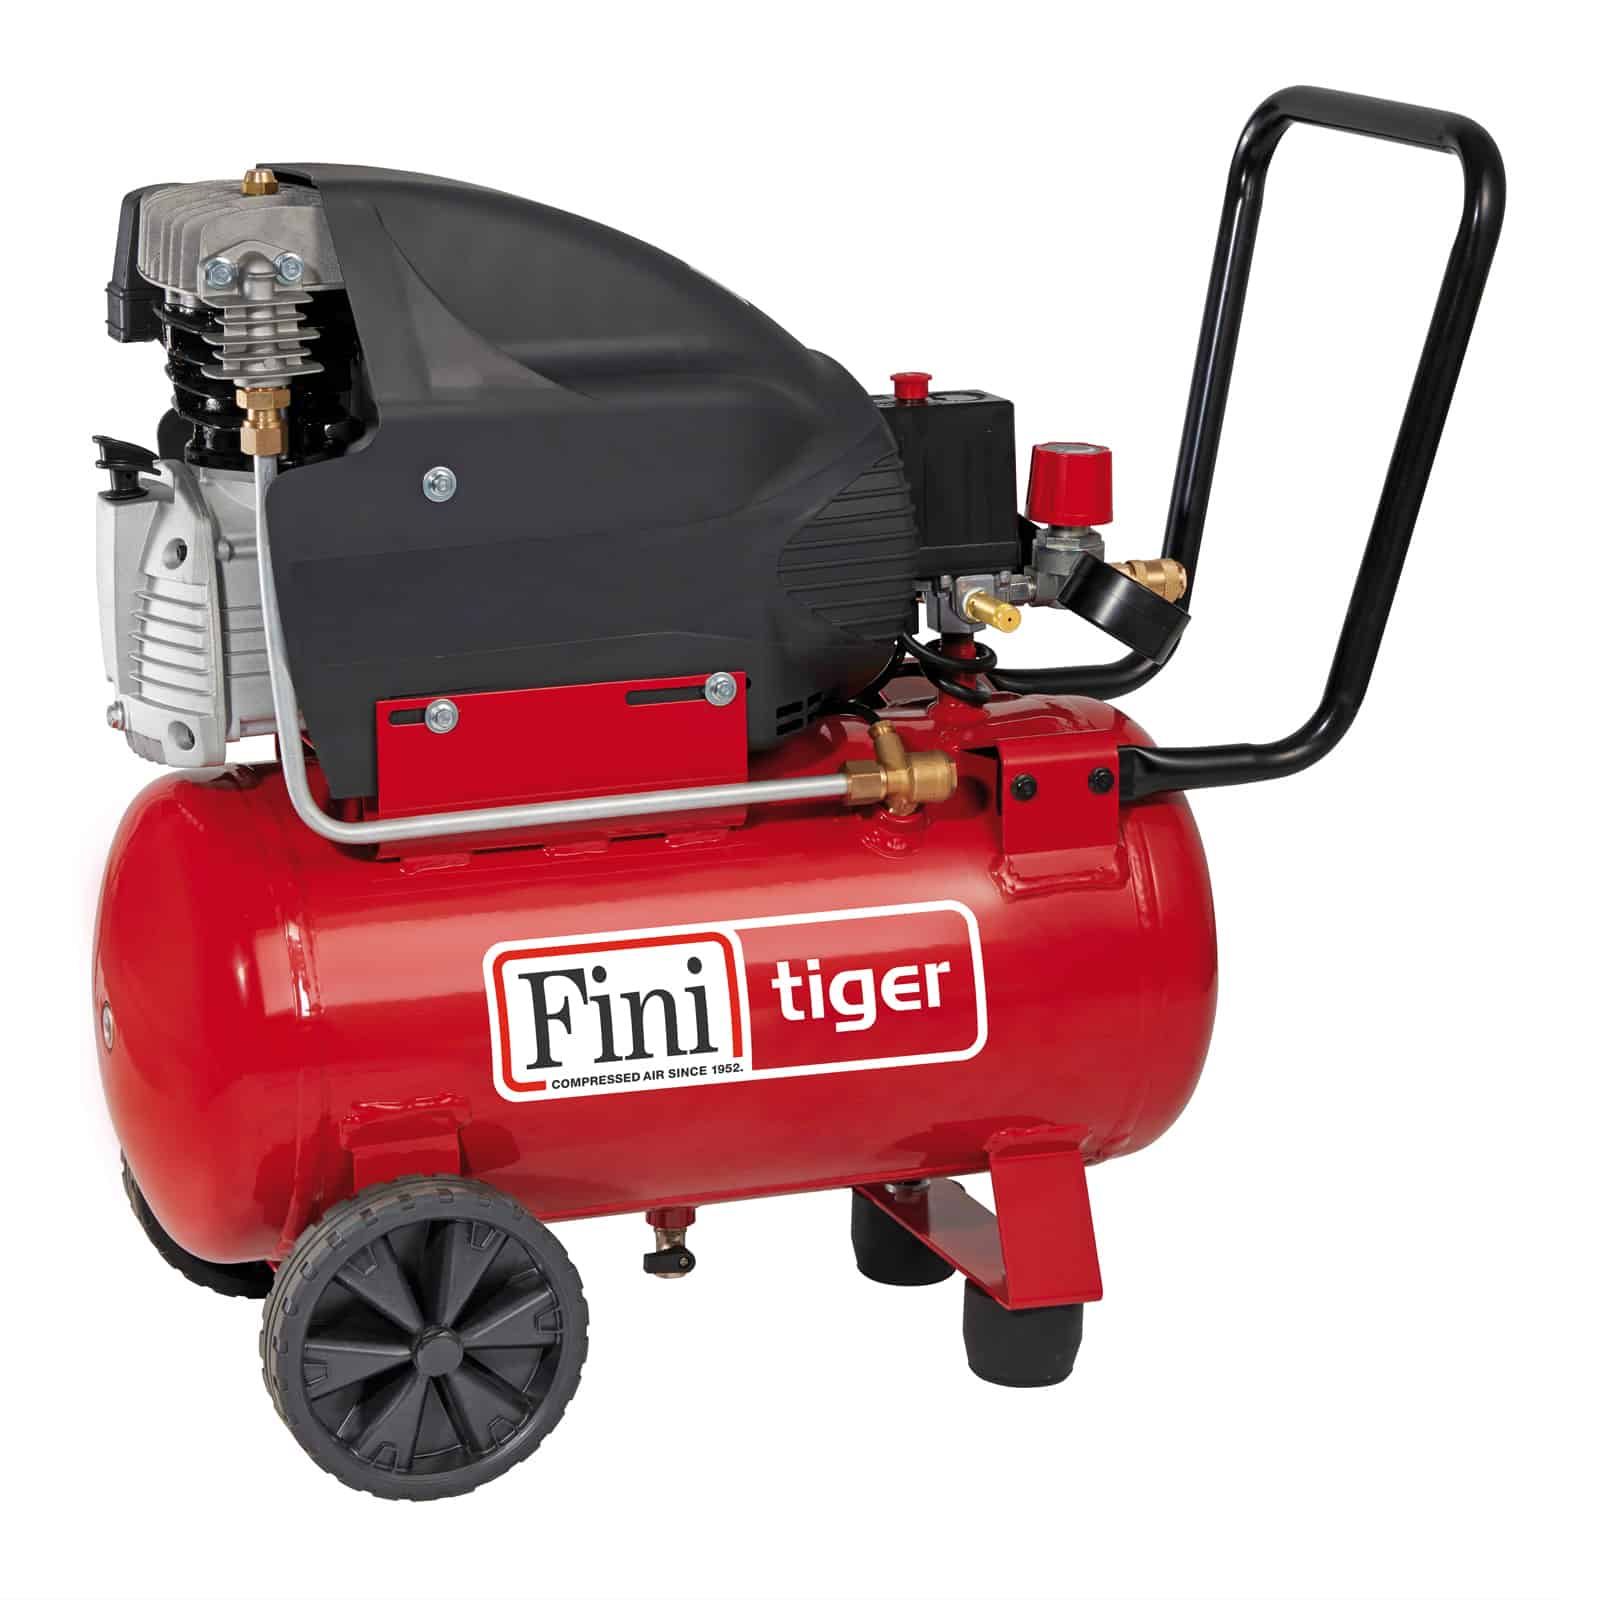 Tiger 285M Lubricated coaxial compressor, designed to meet the needs of hobbyists and professionals.